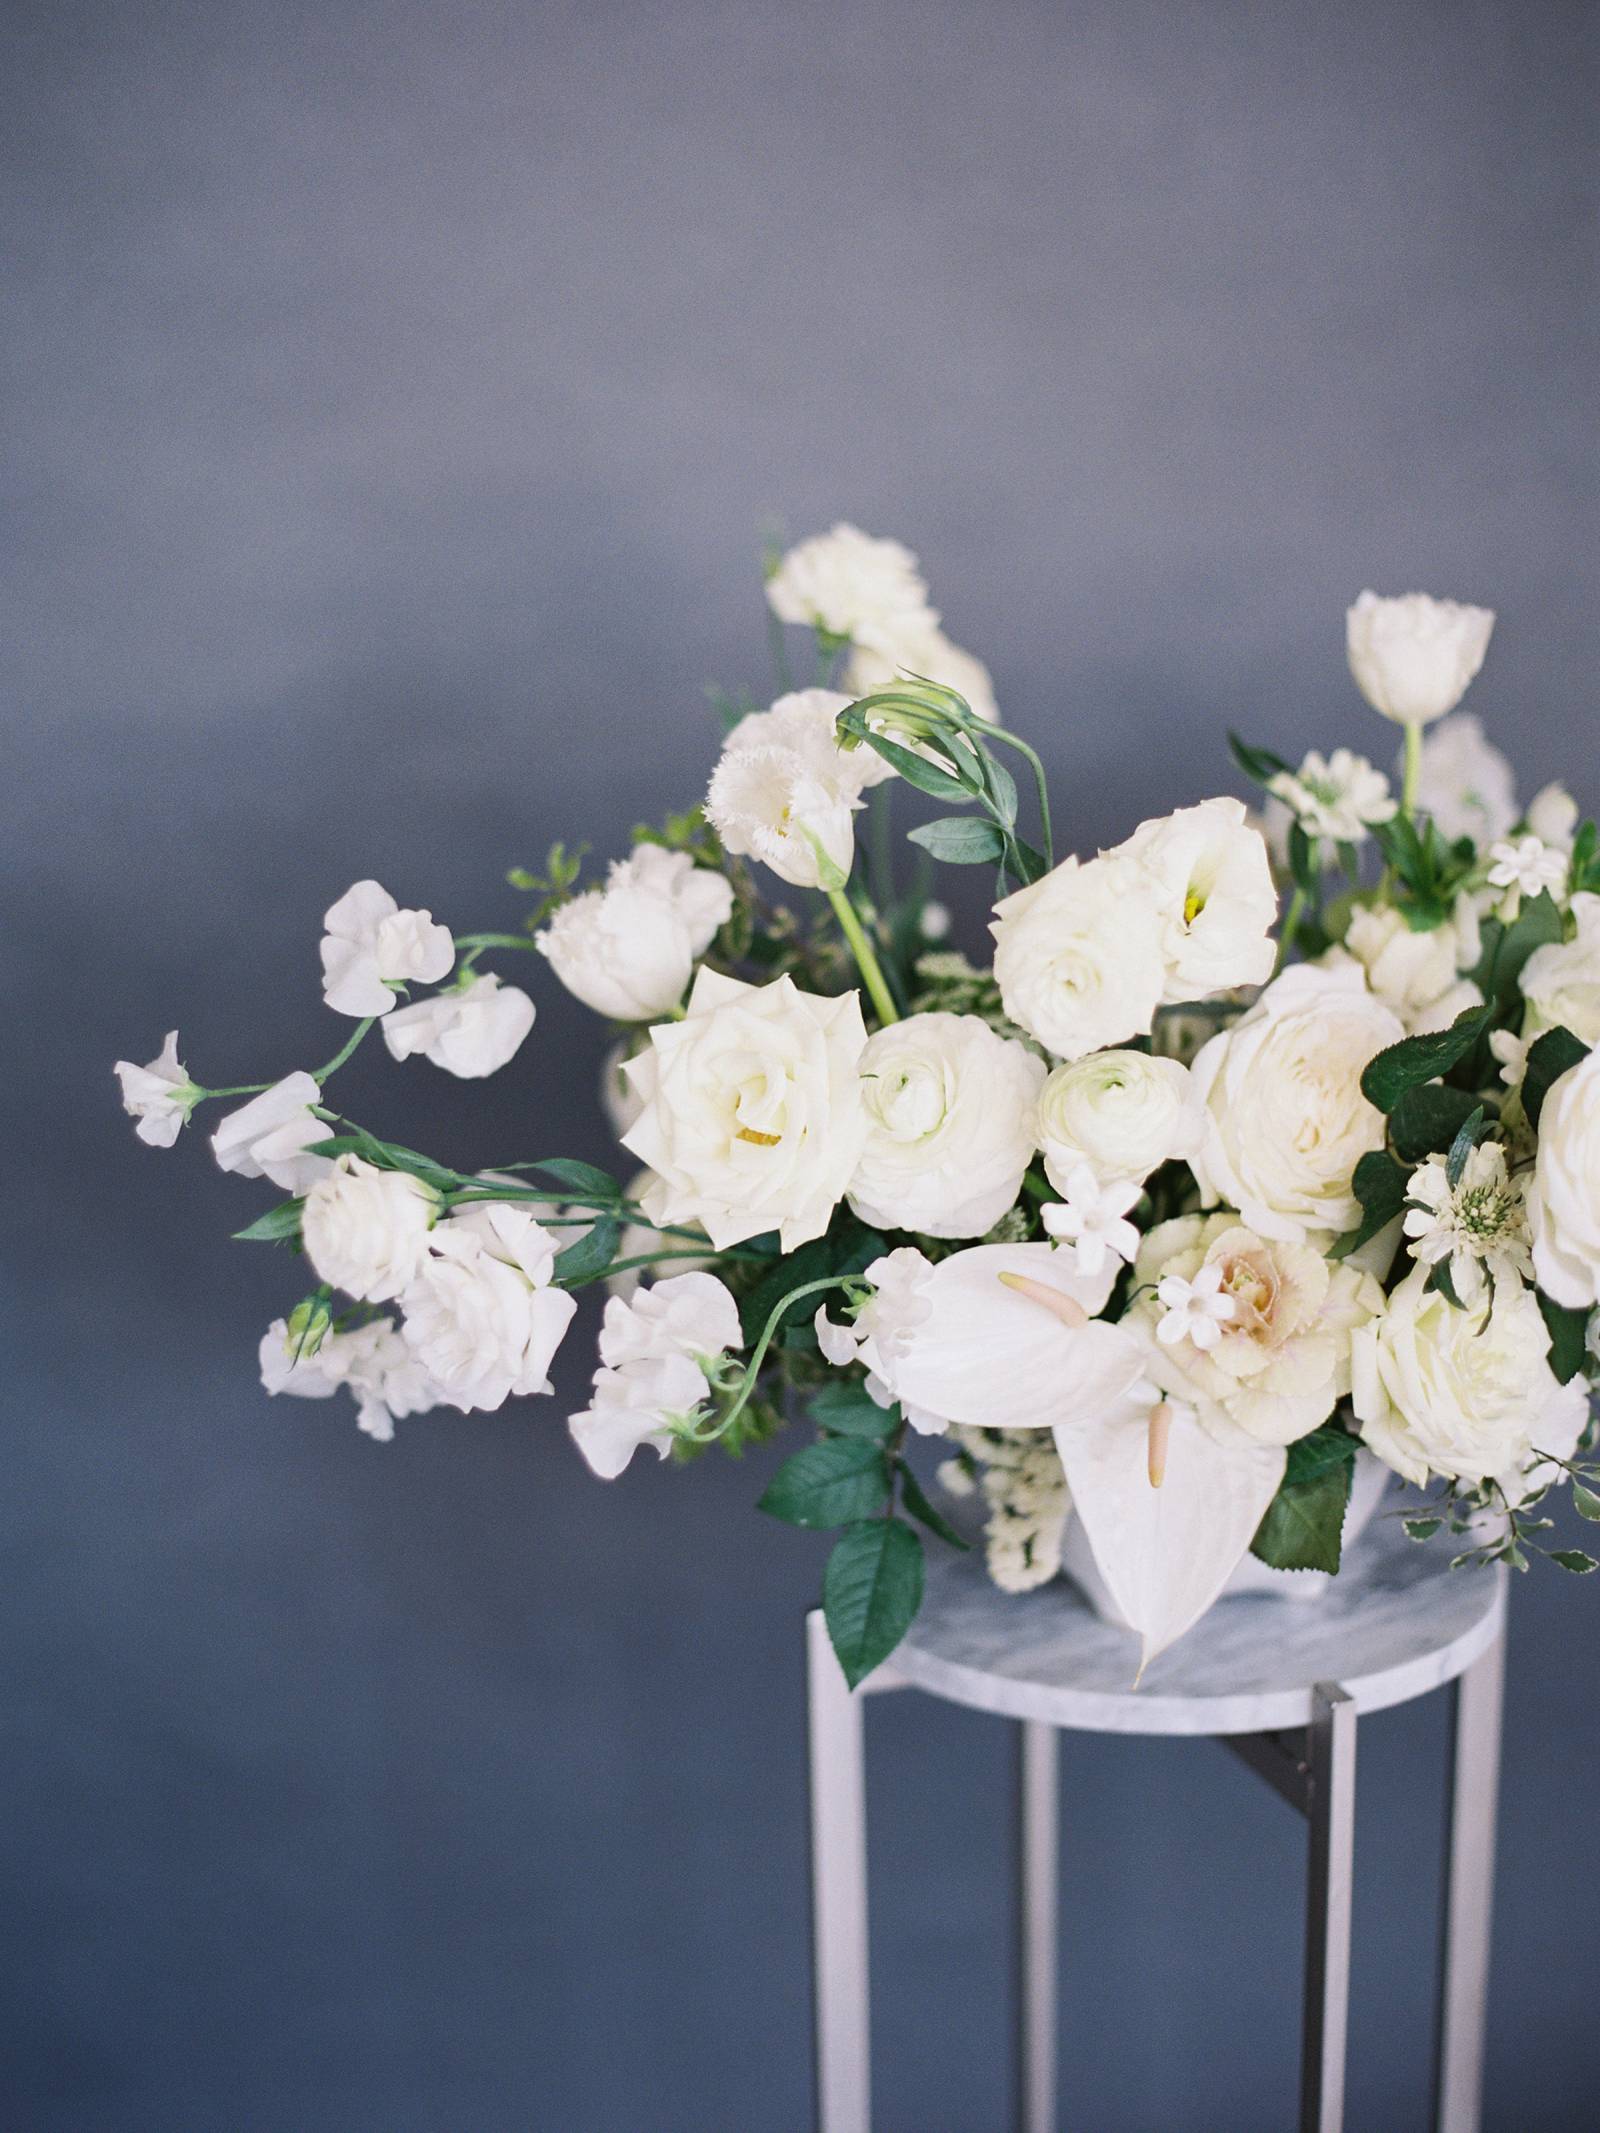 Fine Art Colorado Wedding Photography worked with Emma Lea Floral to capture this beautiful minimalist all white wedding arrangement 